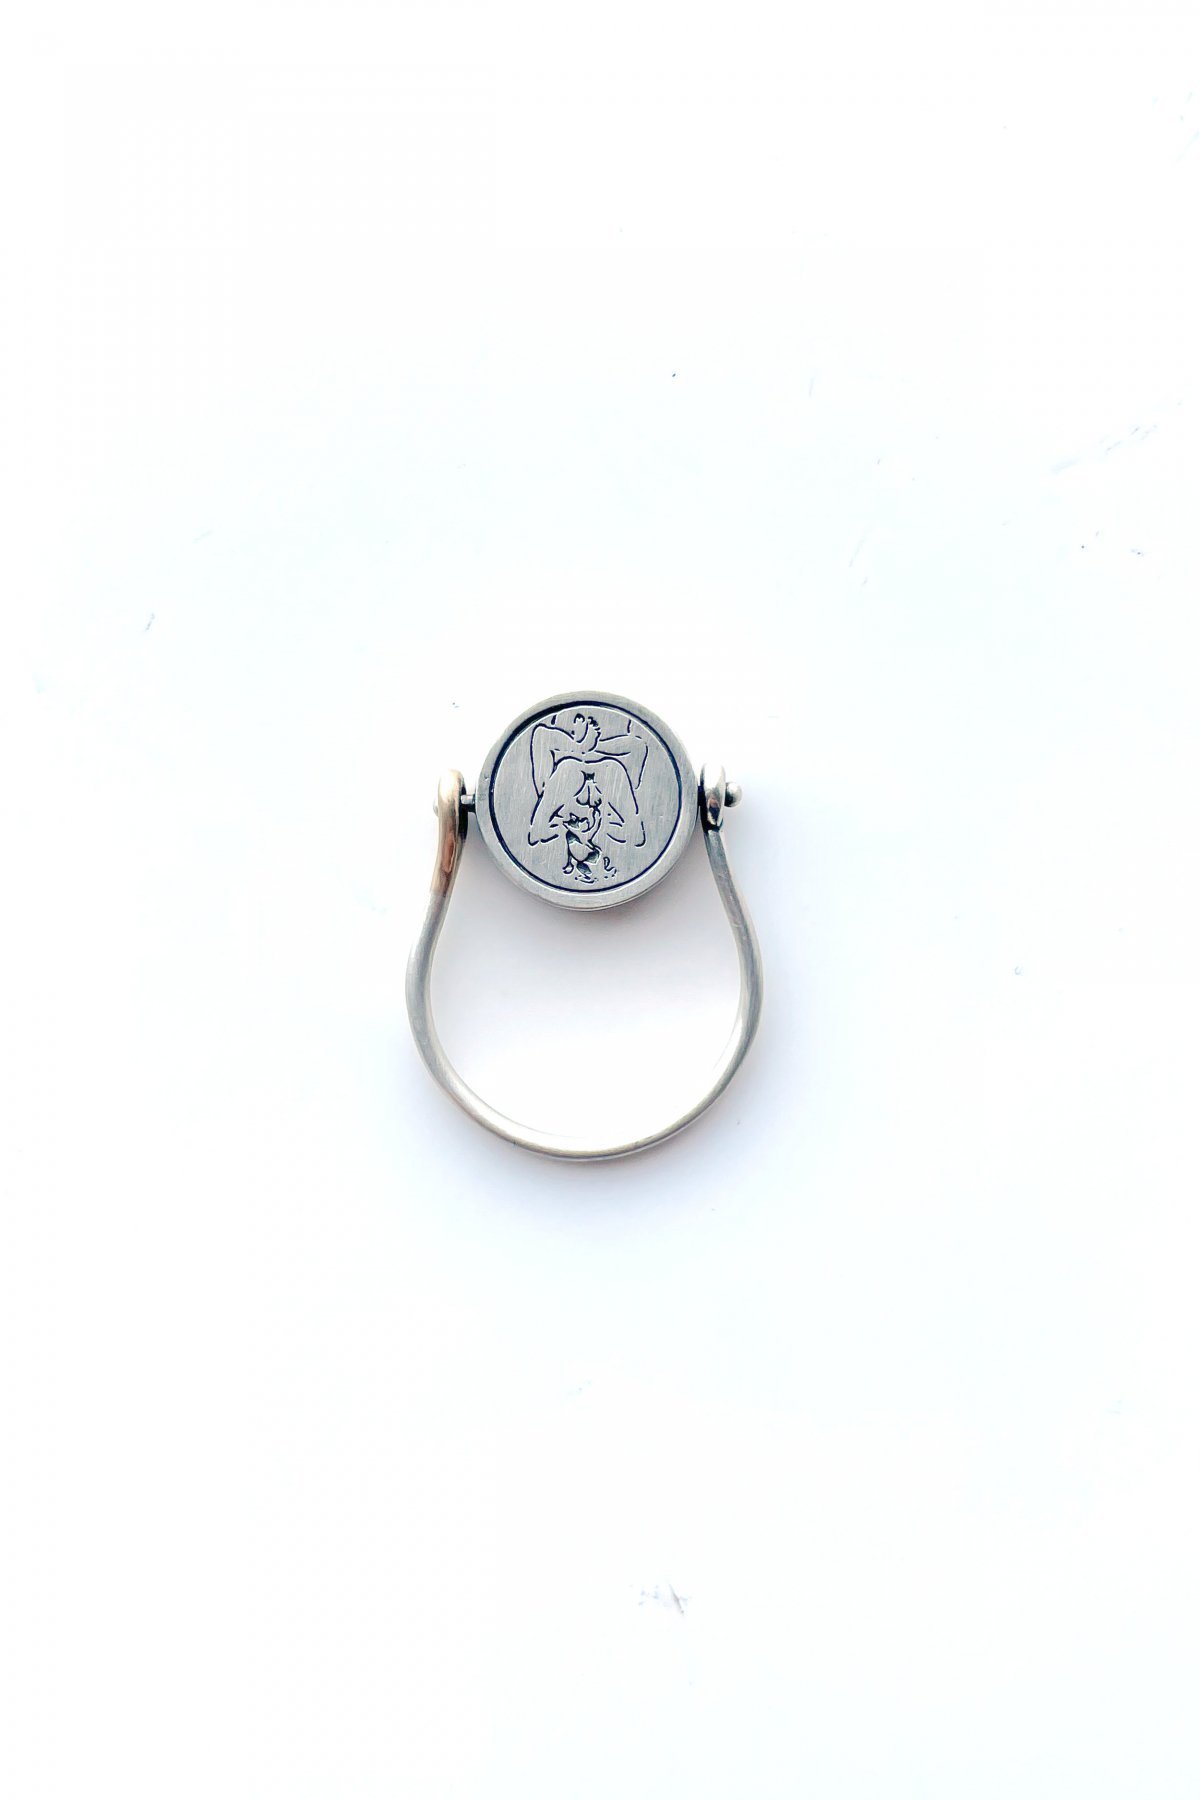 TOMWOODポータークラシック LOVE\u0026PEACE SILVER SIGNET RING